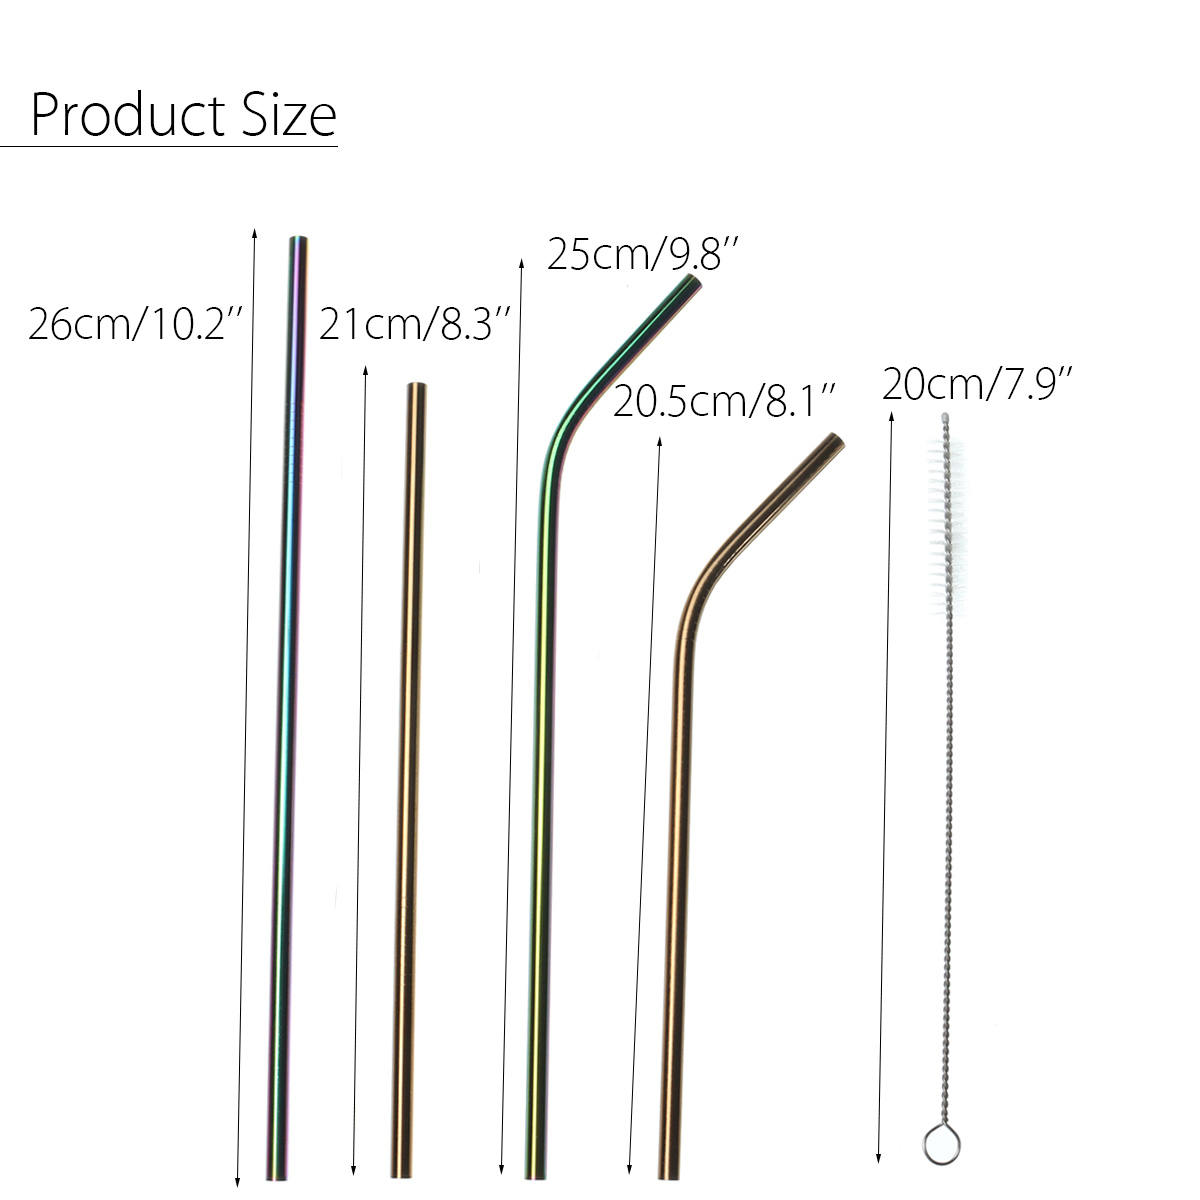 Stainless-Steel-Straw-Set-Long-Metal-Environment-Friendly-Drinking-Straws-Kit-With-2-Brushes-Bag-1311599-9